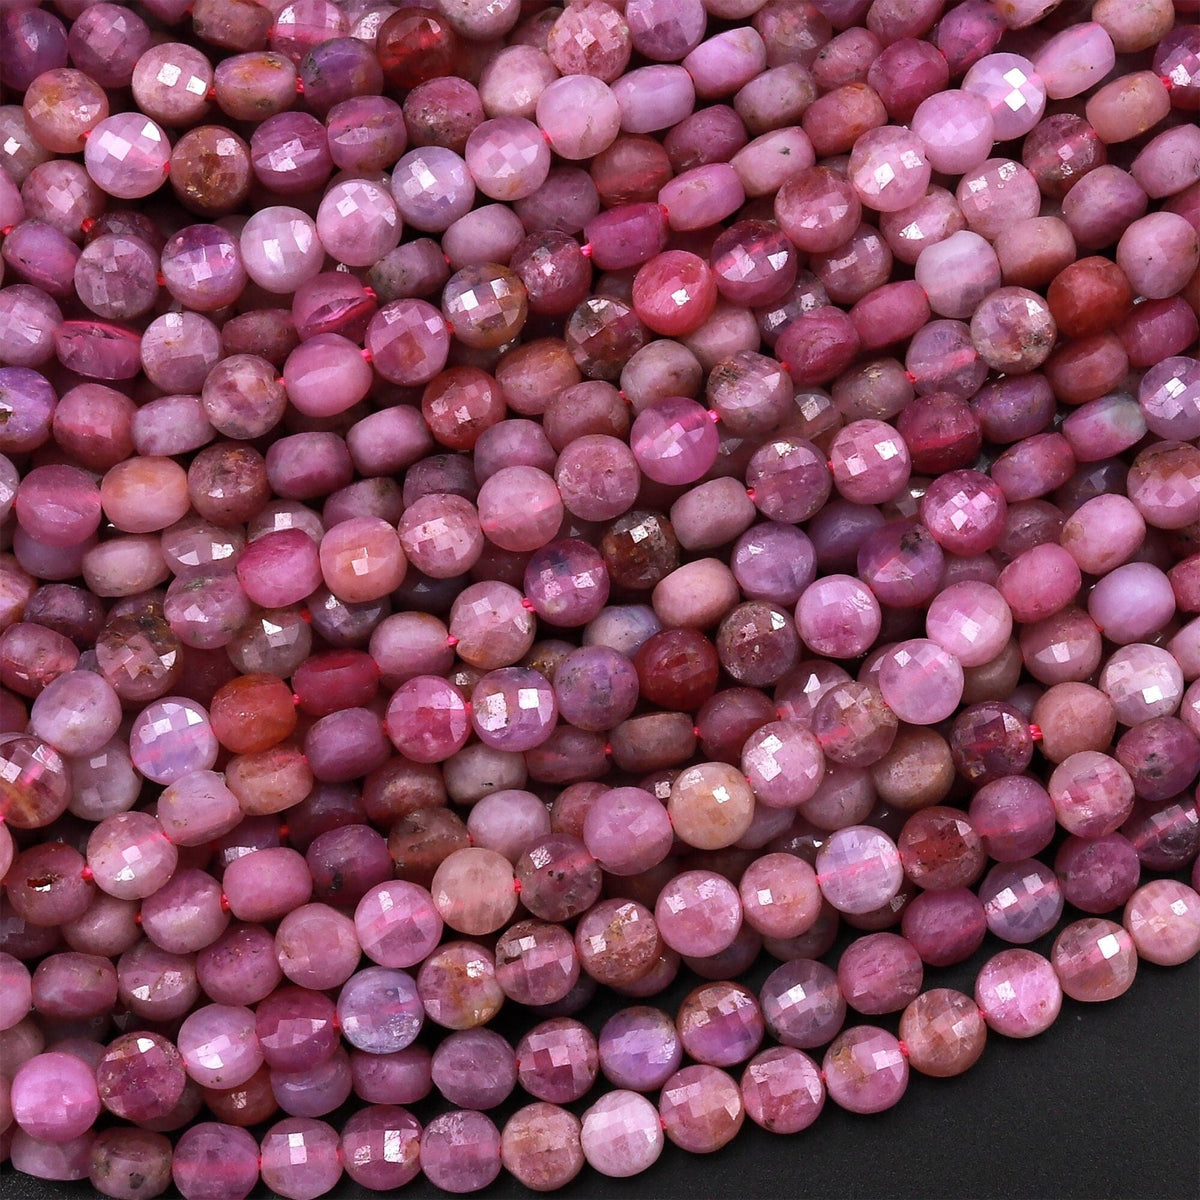 10 Strands 4mm Rondelle Crystal Glass Beads, Micro 48 Faceted Tiny Glass  Beads Diamond Cut Gemstone Strand Loose Beads Sparkly Beads for DIY Jewelry